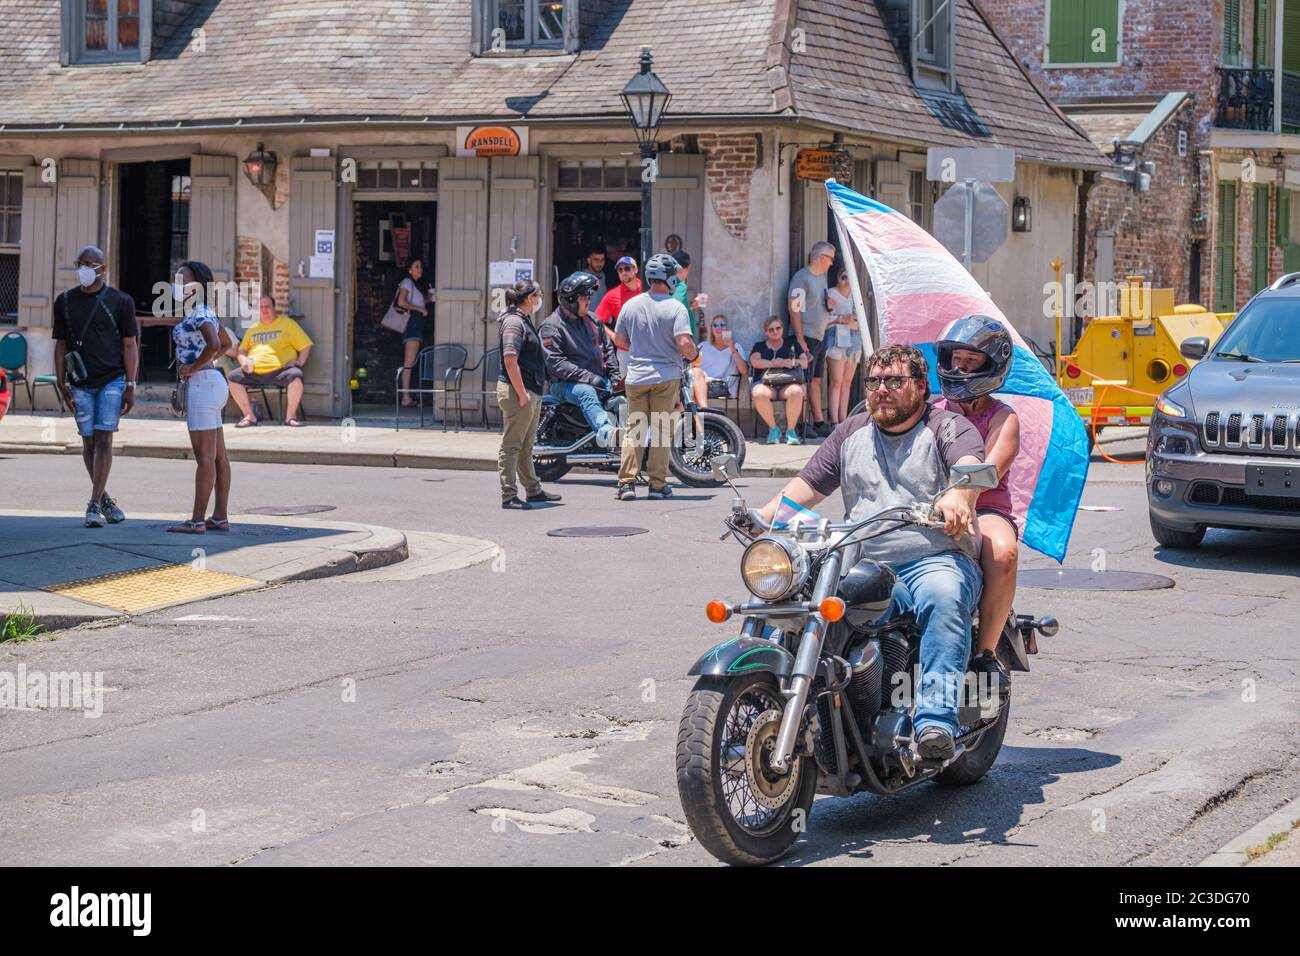 New Orleans, Louisiana/USA - 6/13/2020: People on motorcycle parading in Trans Black Lives Matter demonstration in French Quarter Stock Photo